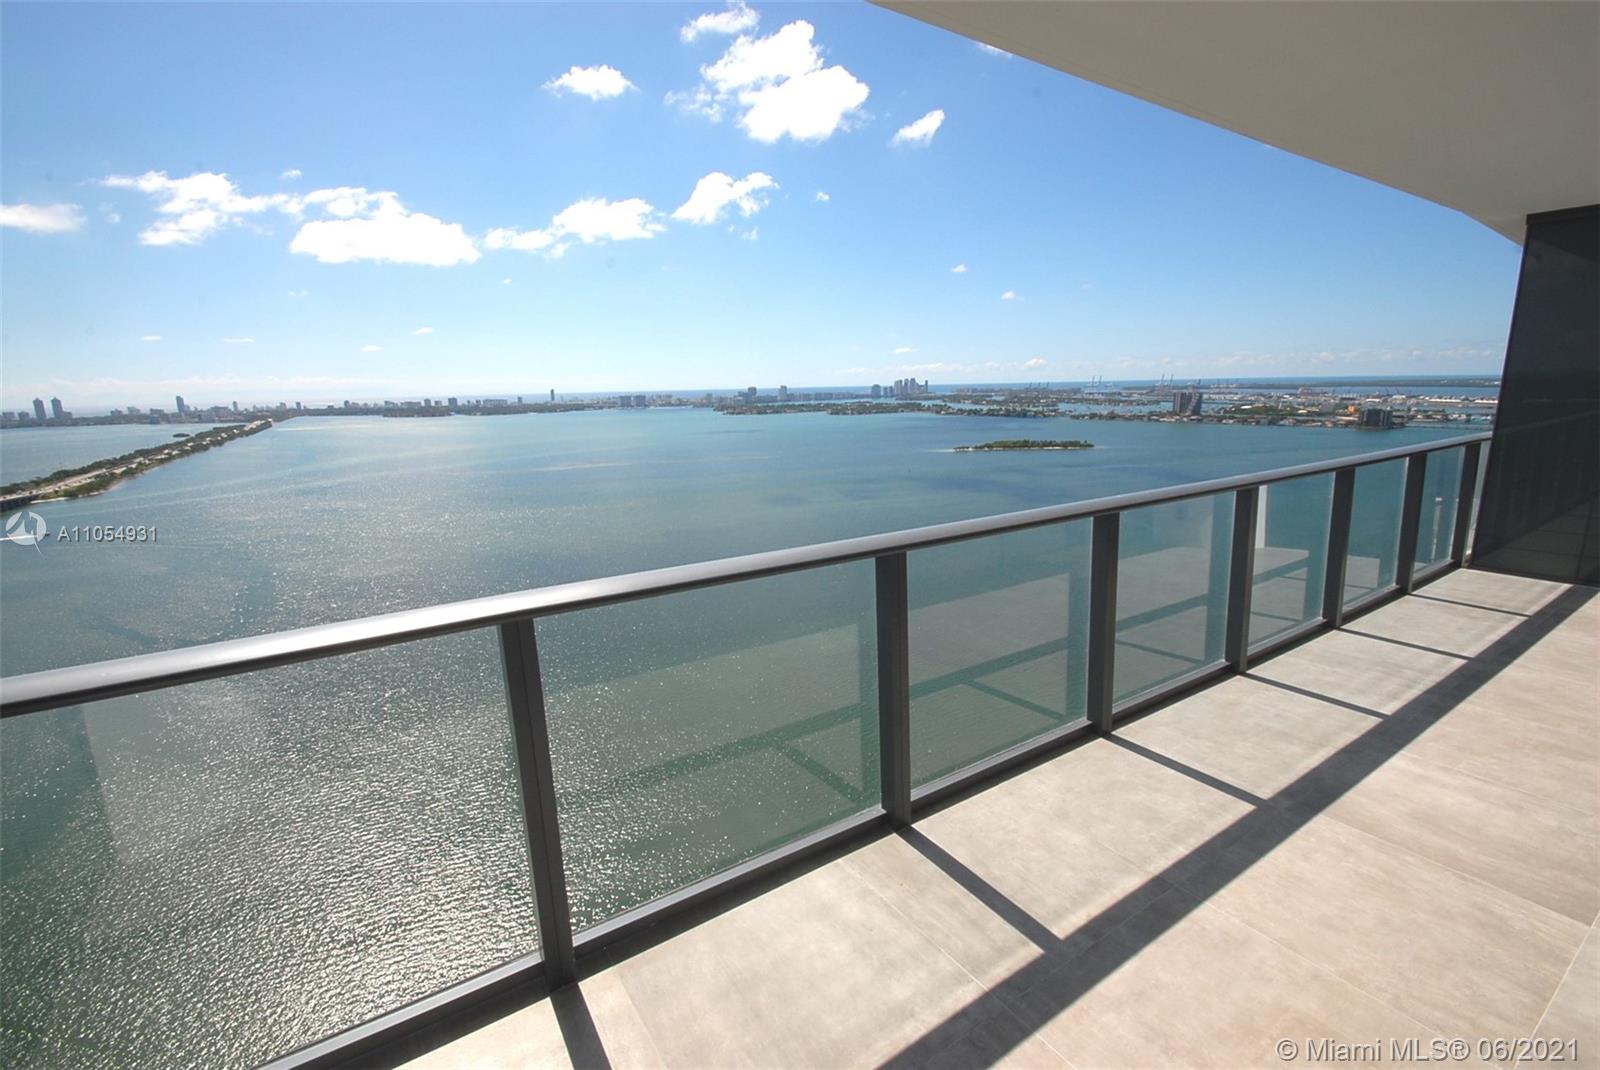 Photo 1 of Paraiso One Apt 4005 in Miami - MLS A11054931